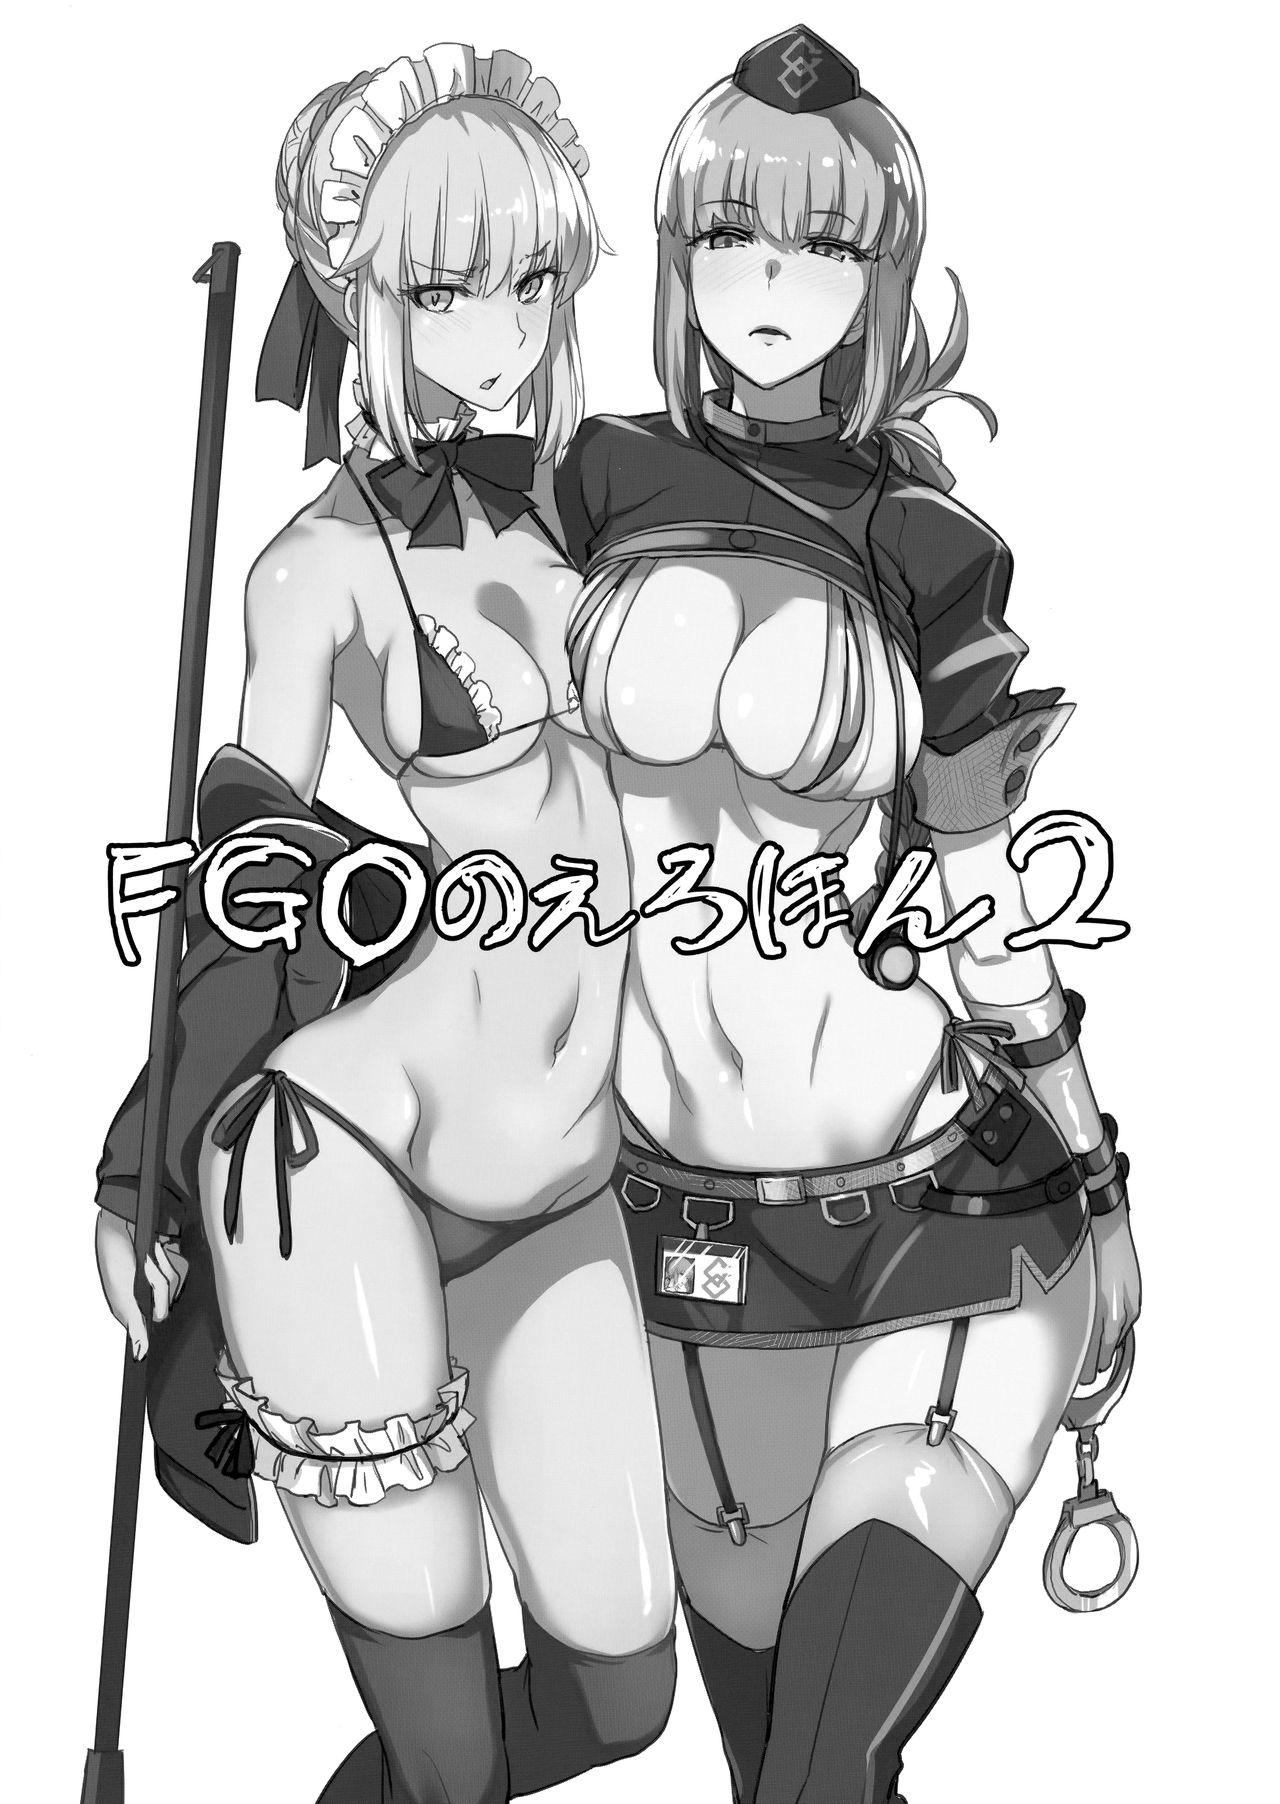 Stepsiblings FGO no Erohon 2 - Fate grand order Doggystyle Porn - Page 2